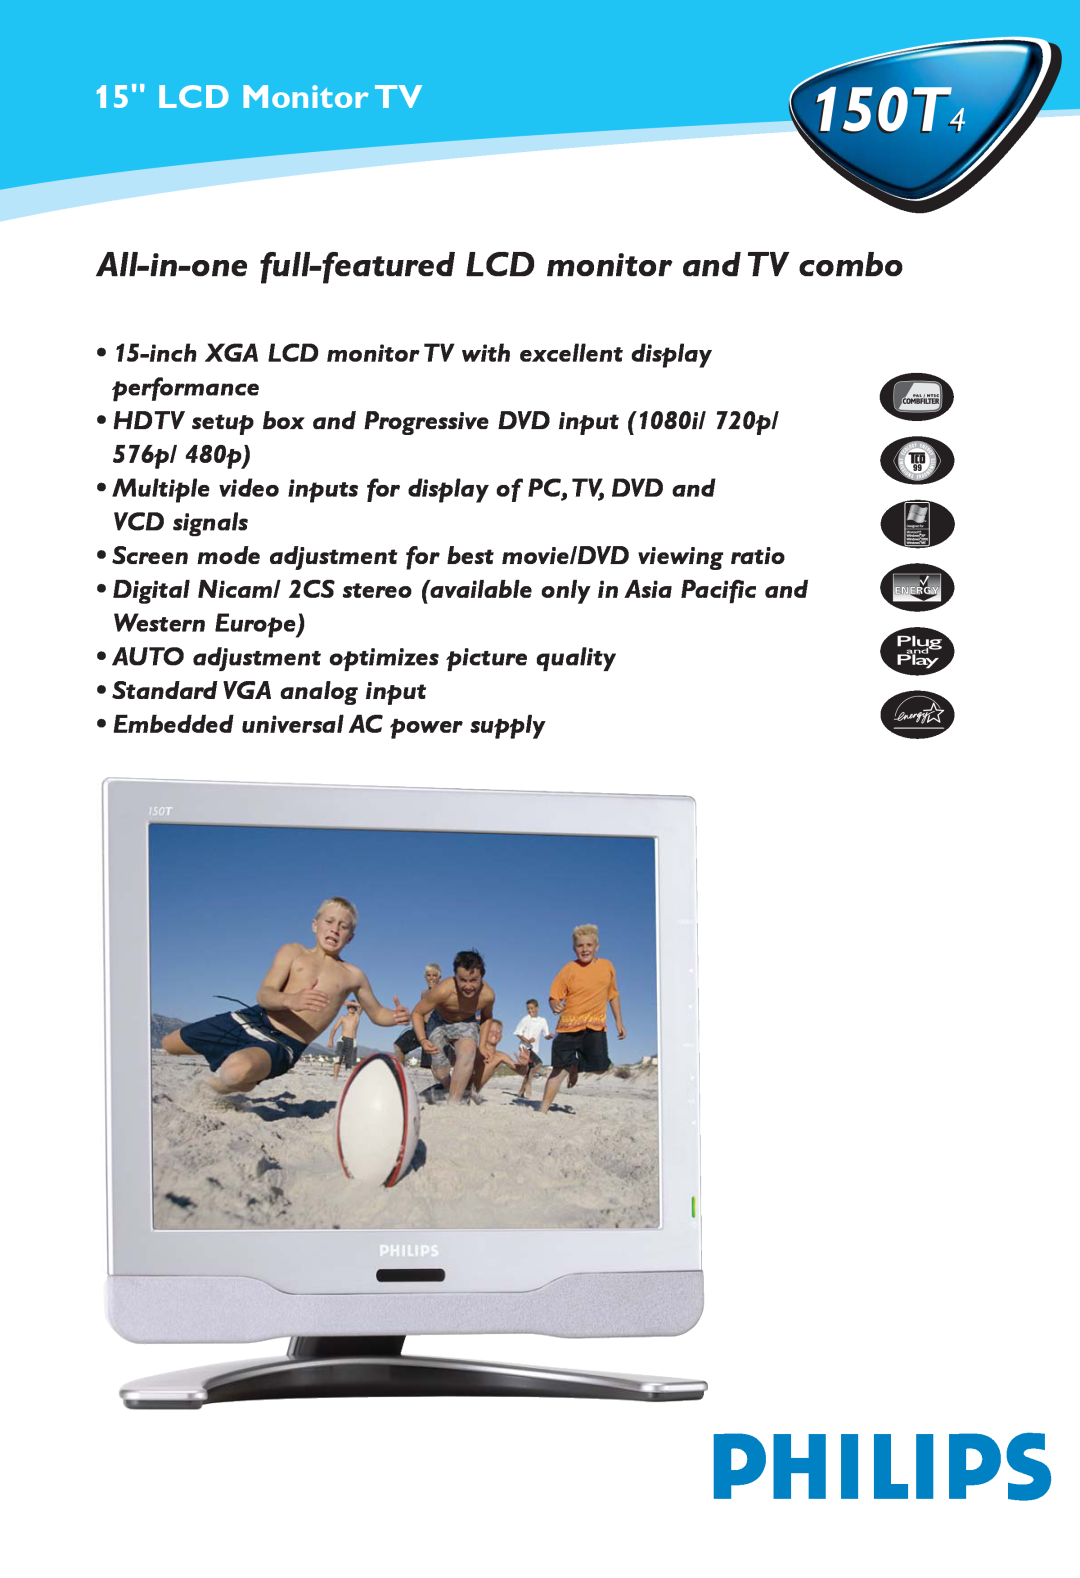 Philips manual 150T4, All-in-one full-featured LCD monitor and TV combo, LCD Monitor TV 